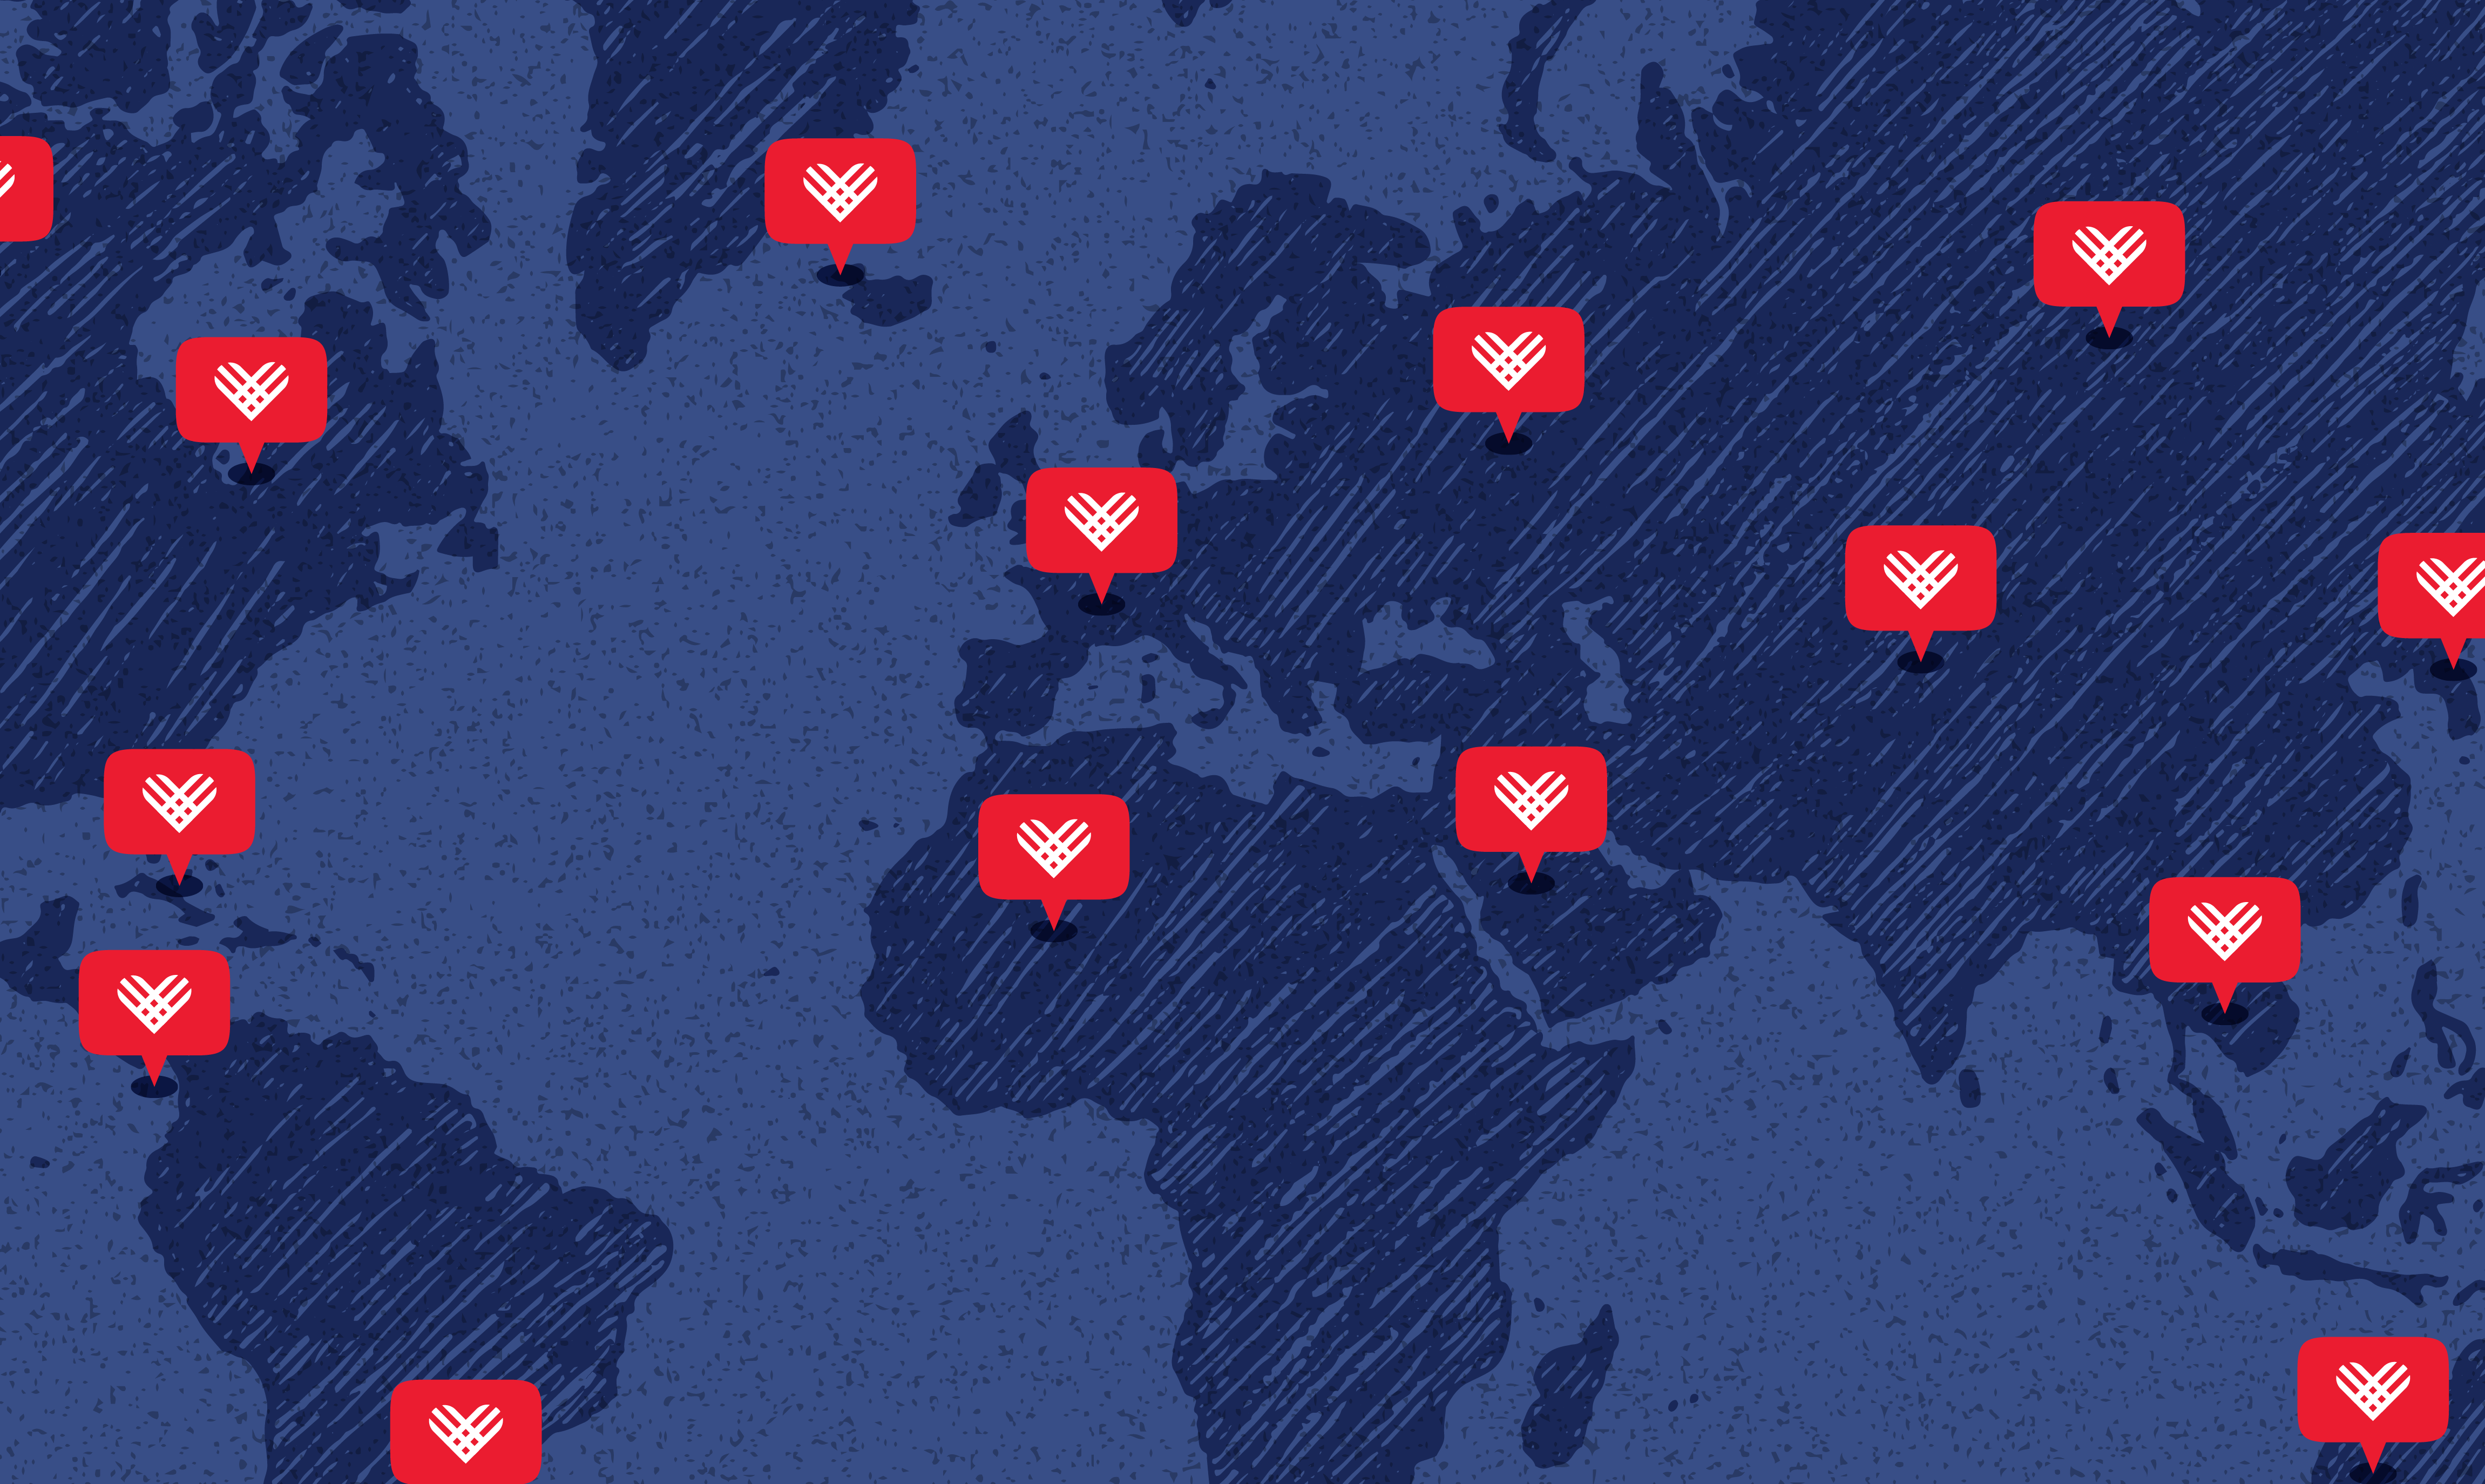 blue map of continents with red heart bubbles scattered throughout